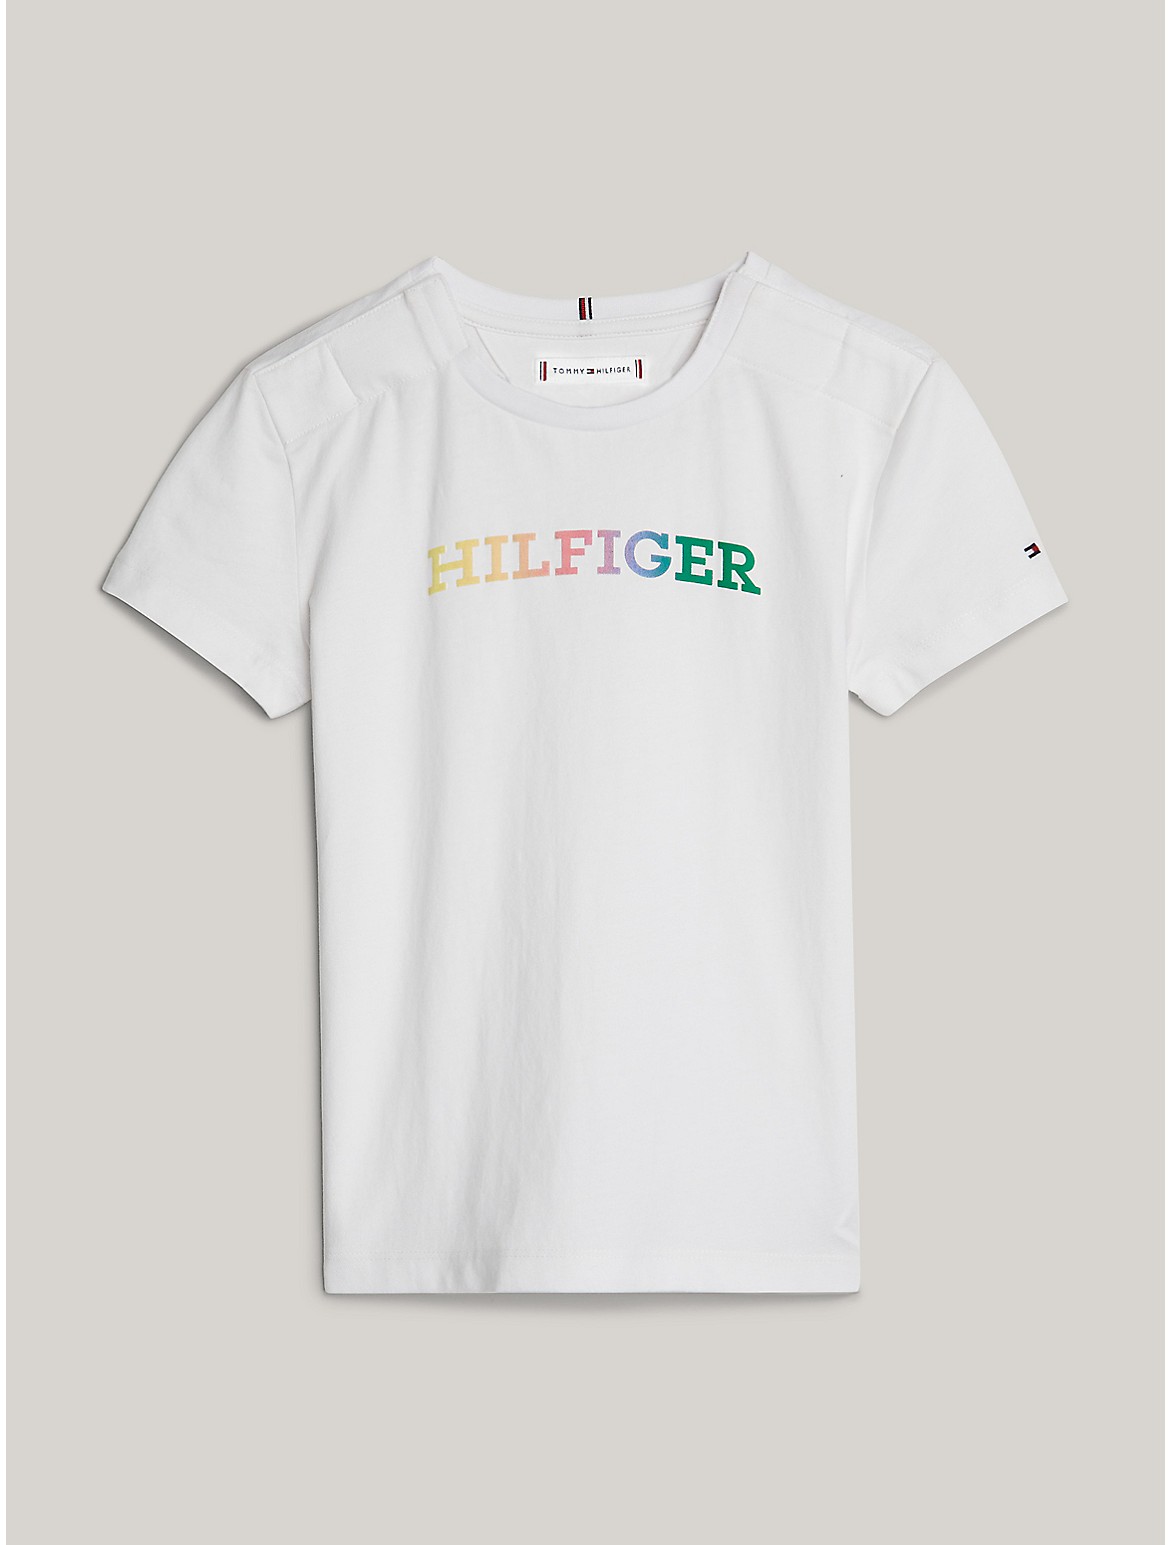 Tommy Hilfiger Girls' Kids' Multicolor Monotype T-Shirt - White - 10